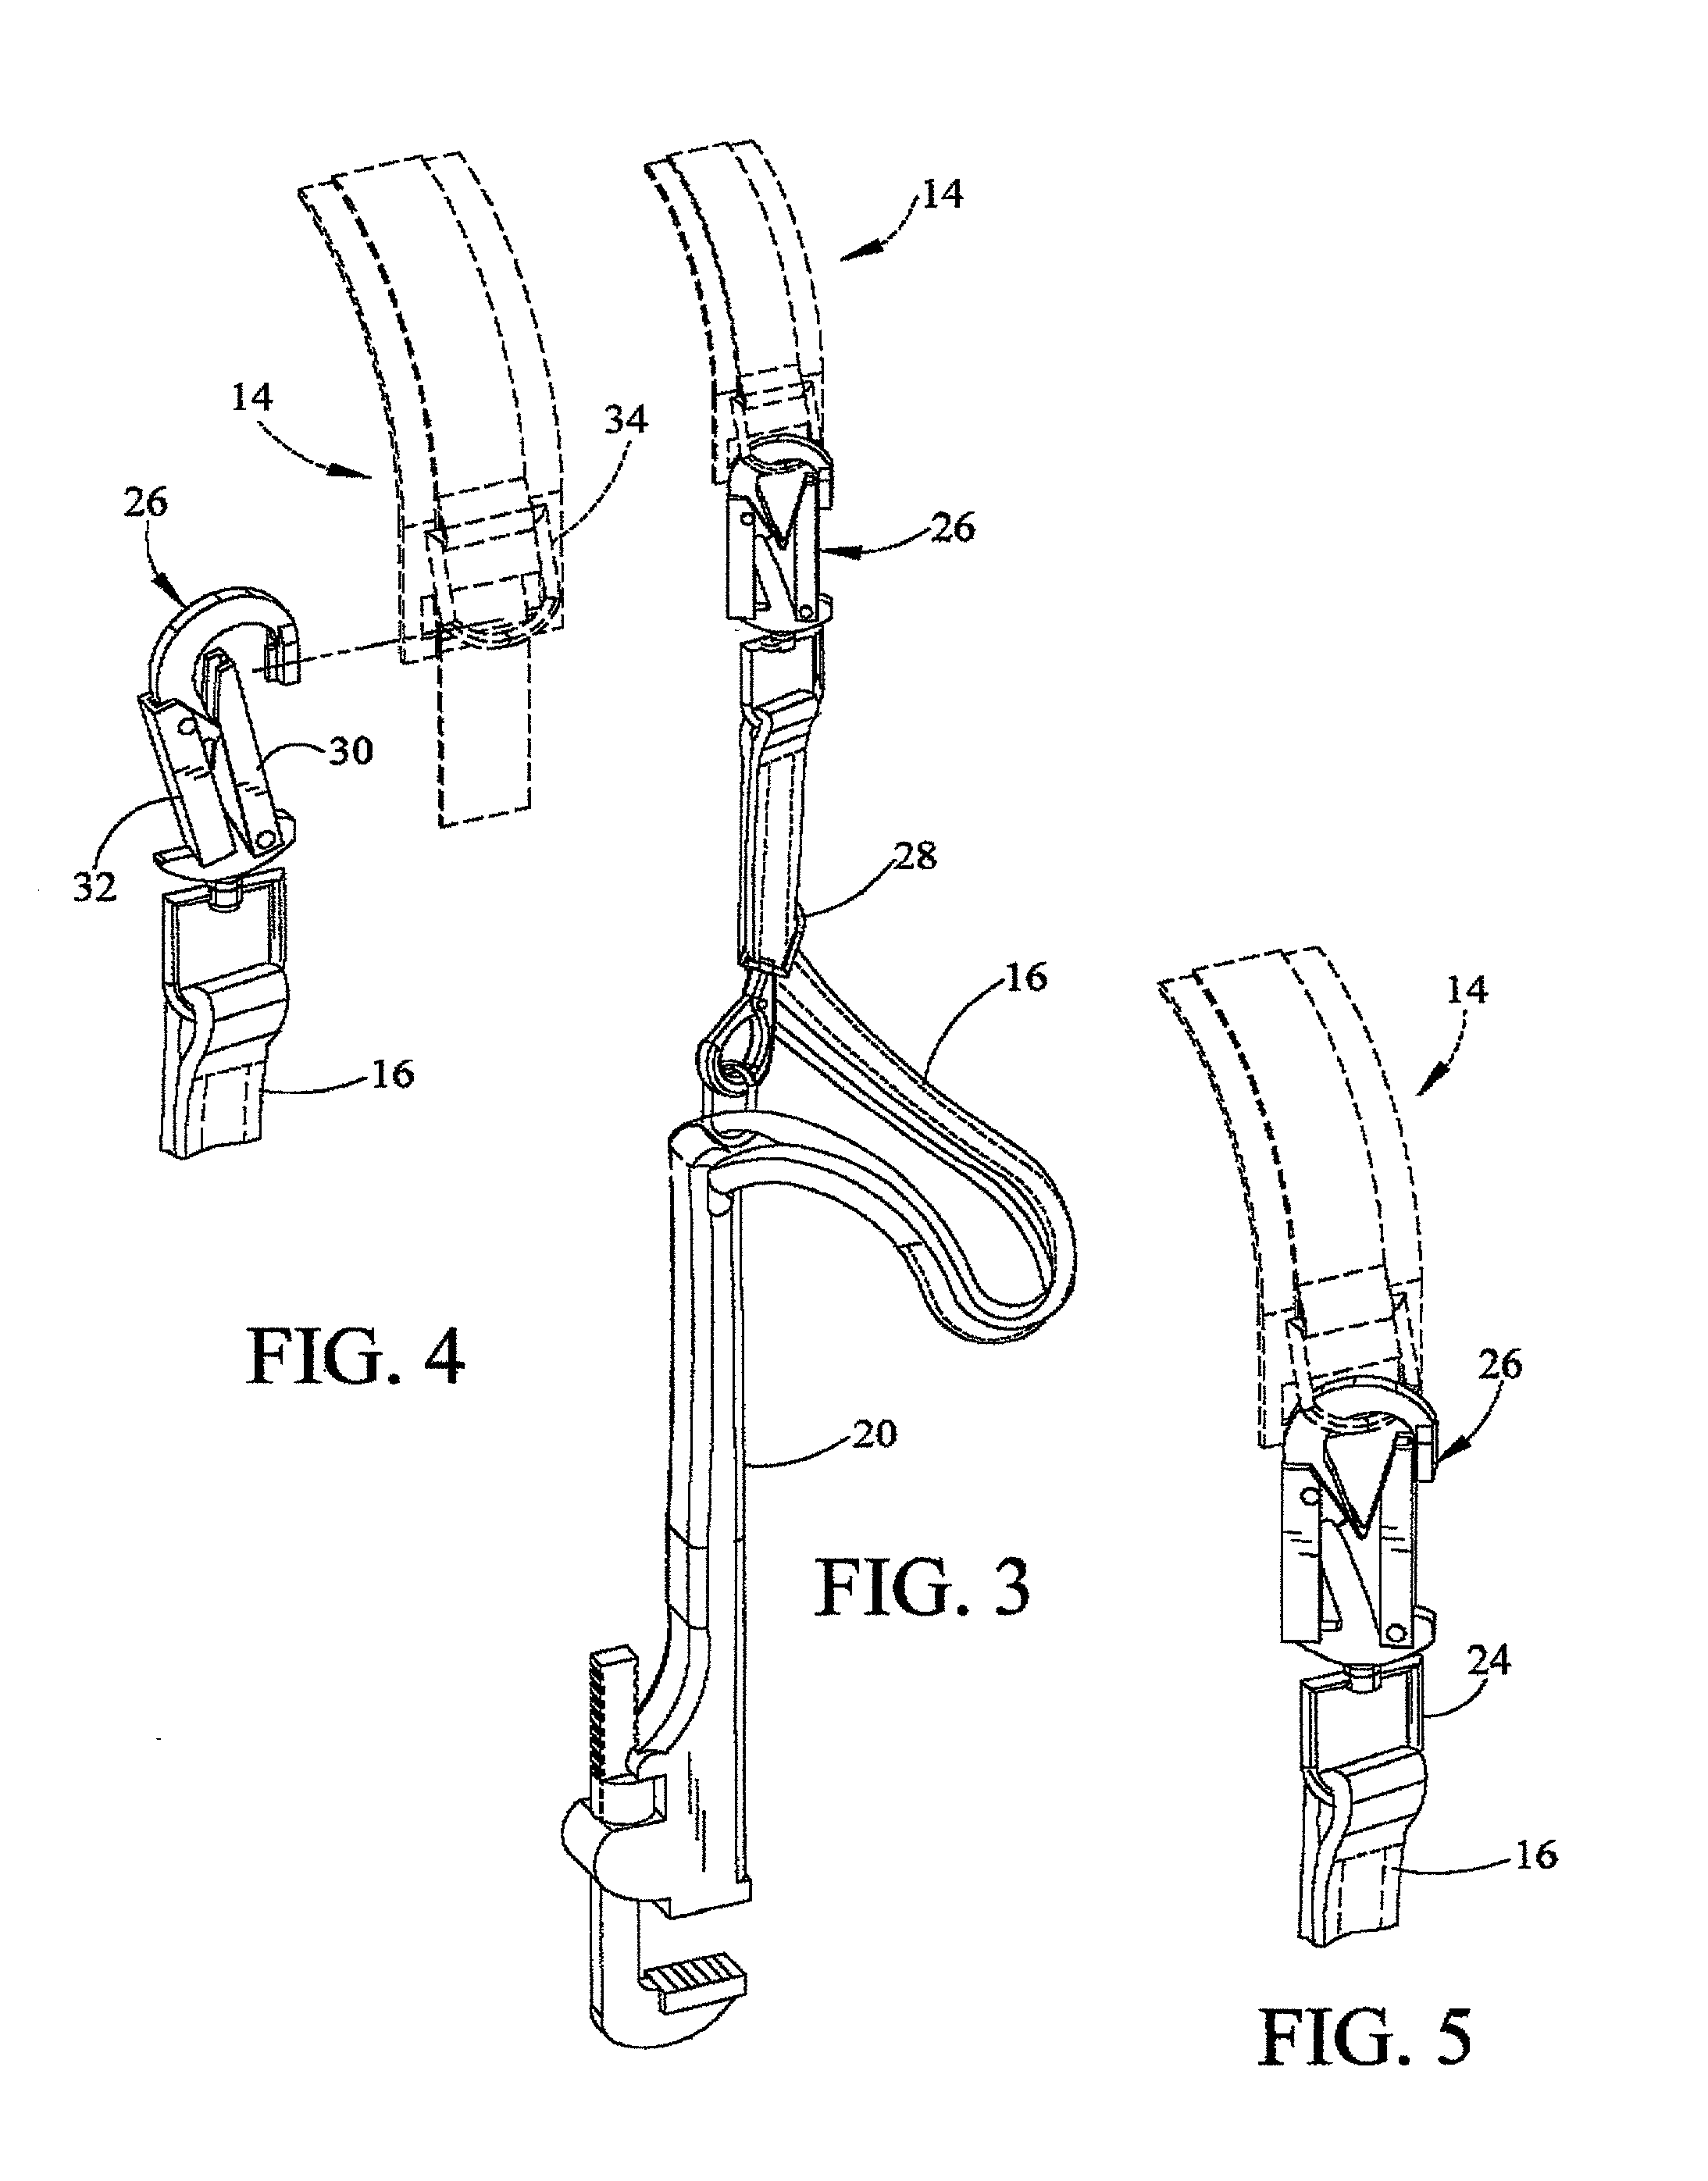 Tool tethering method and apparatus